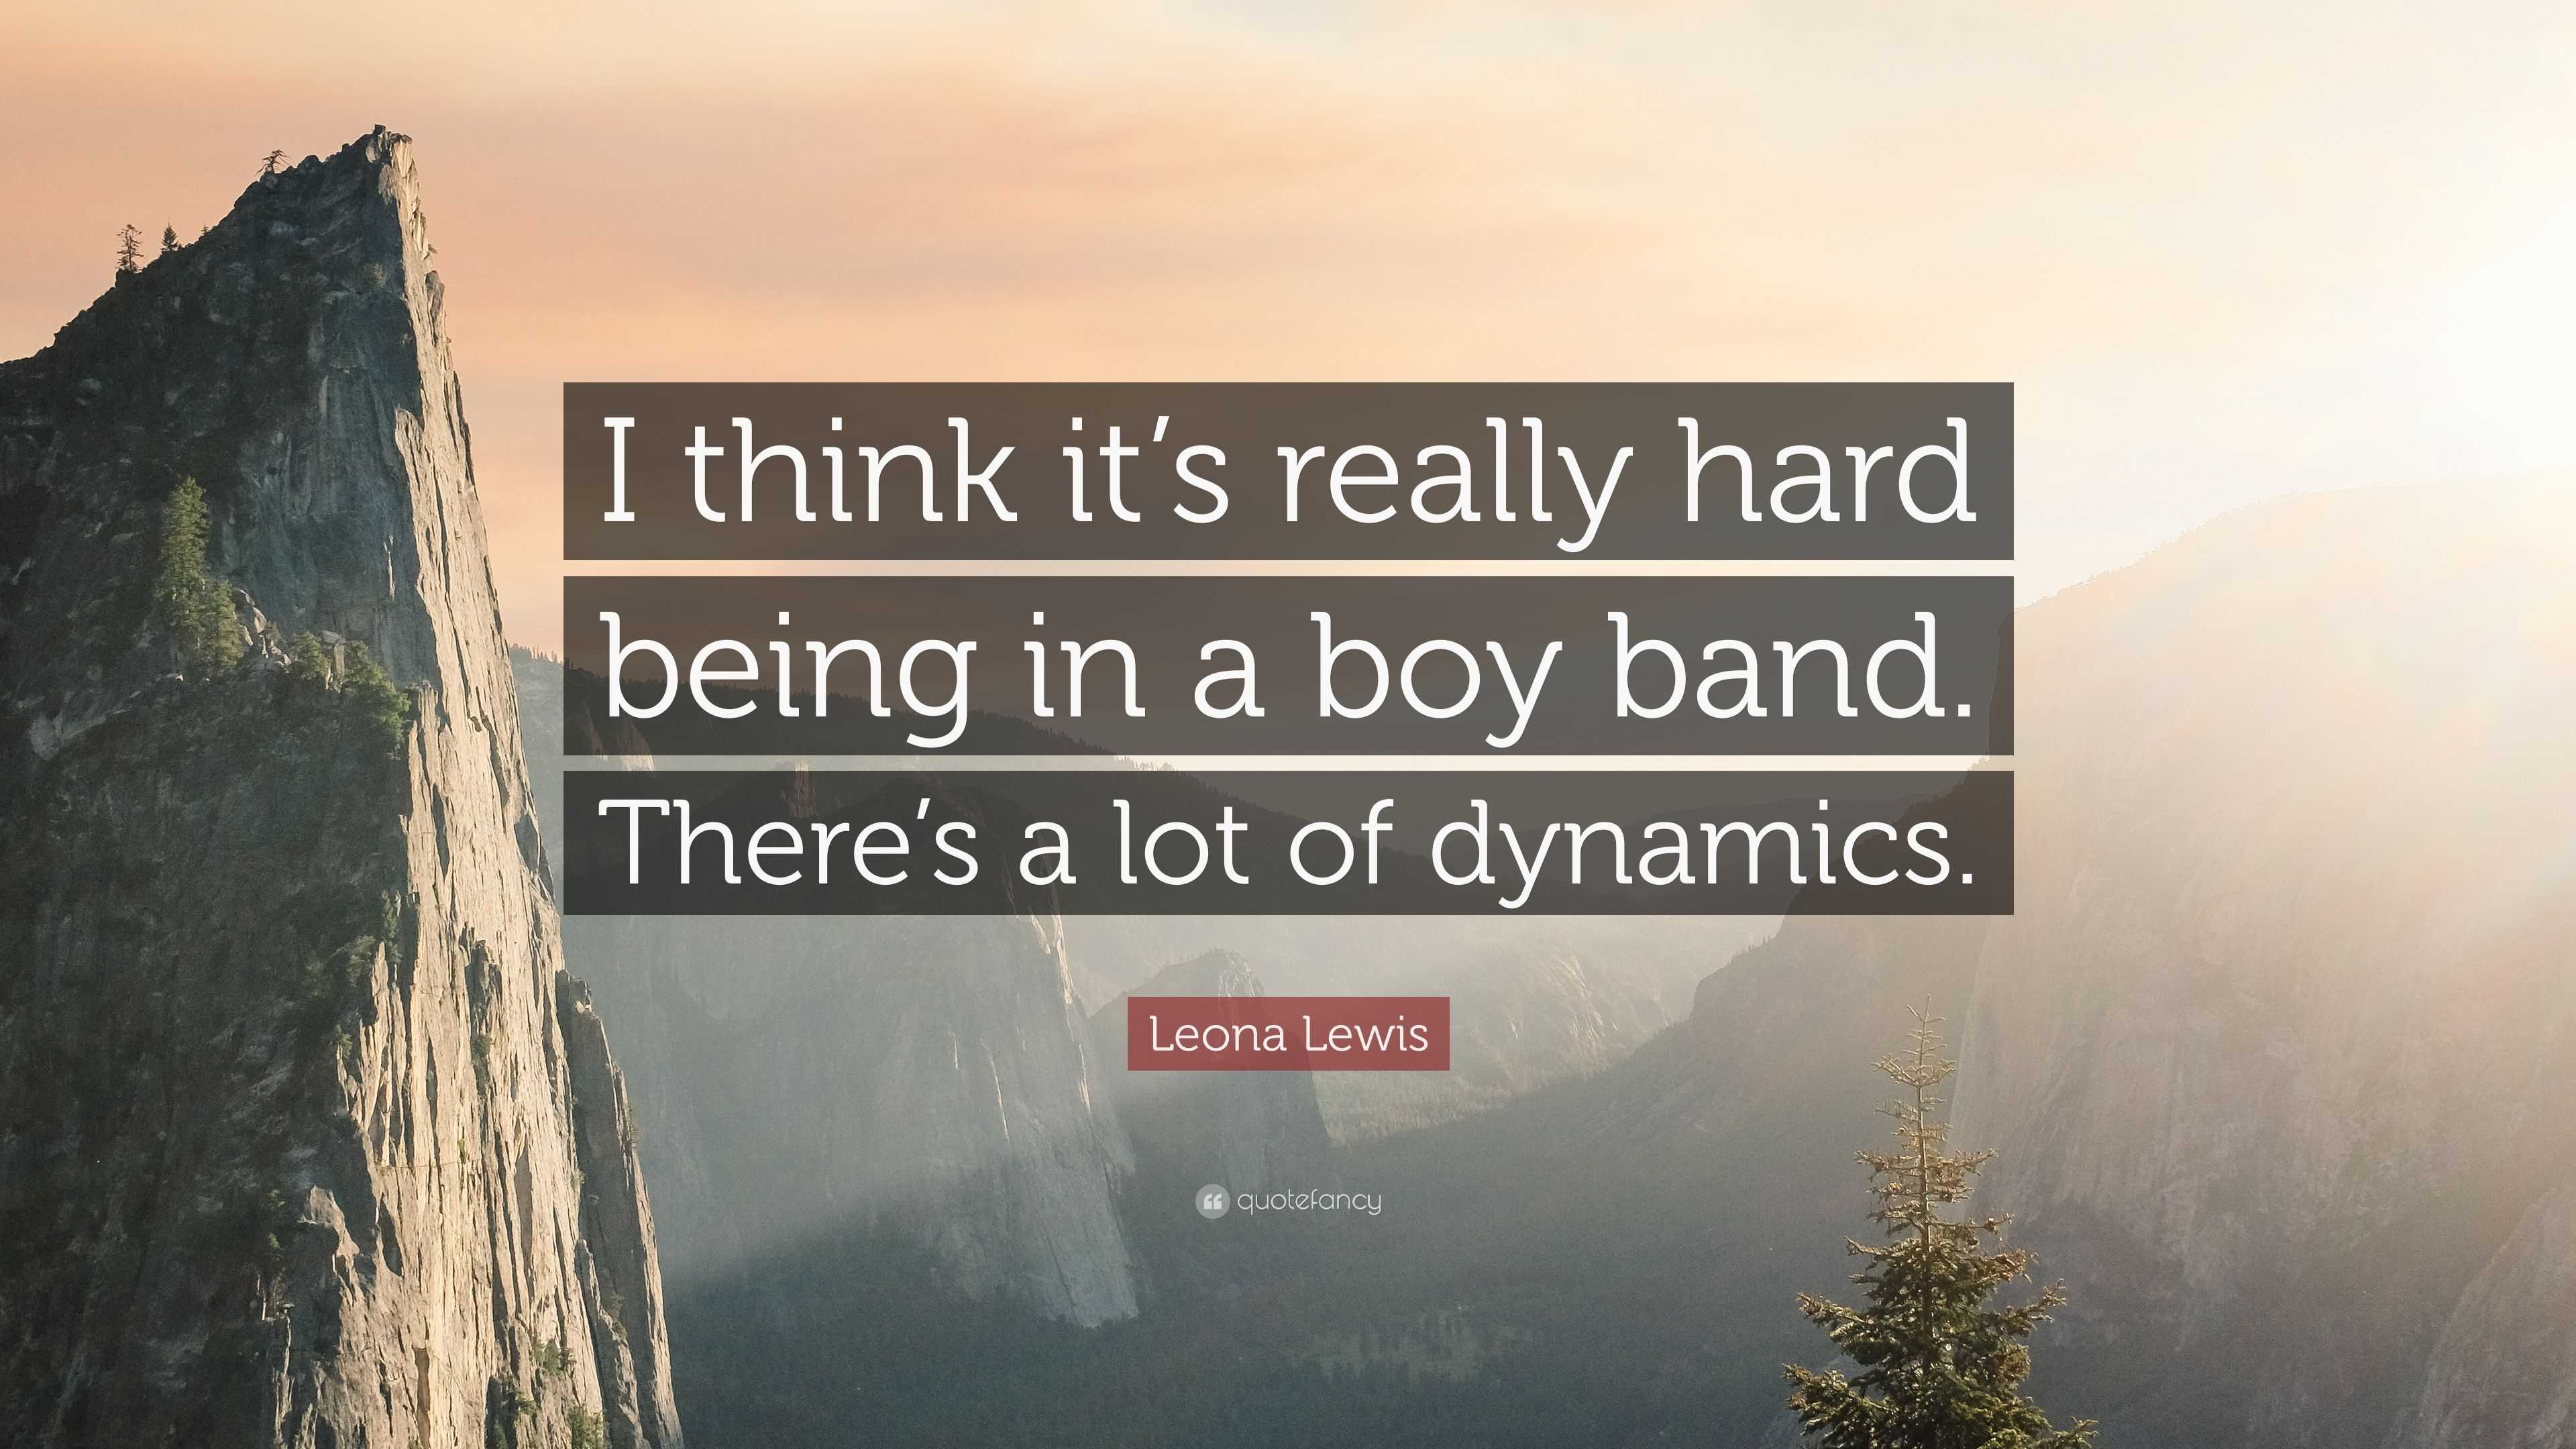 Is it hard being in a band?